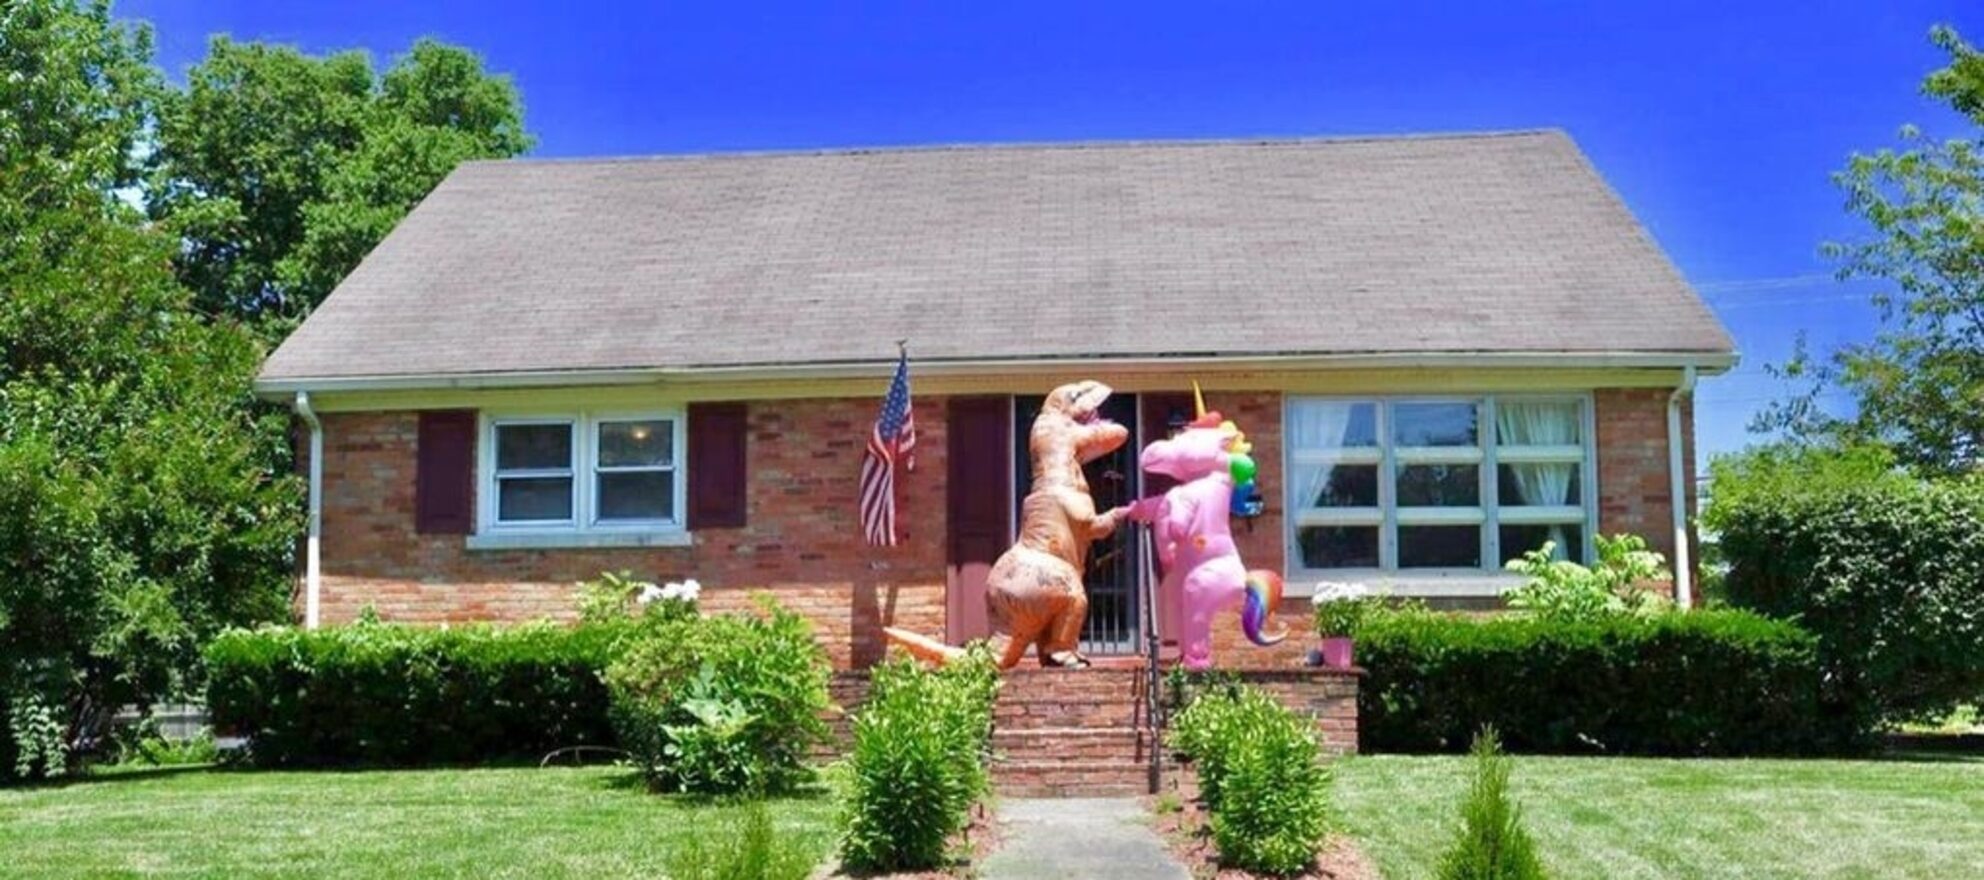 Unicorn and dinosaur steal the show in Kentucky home's listing photos